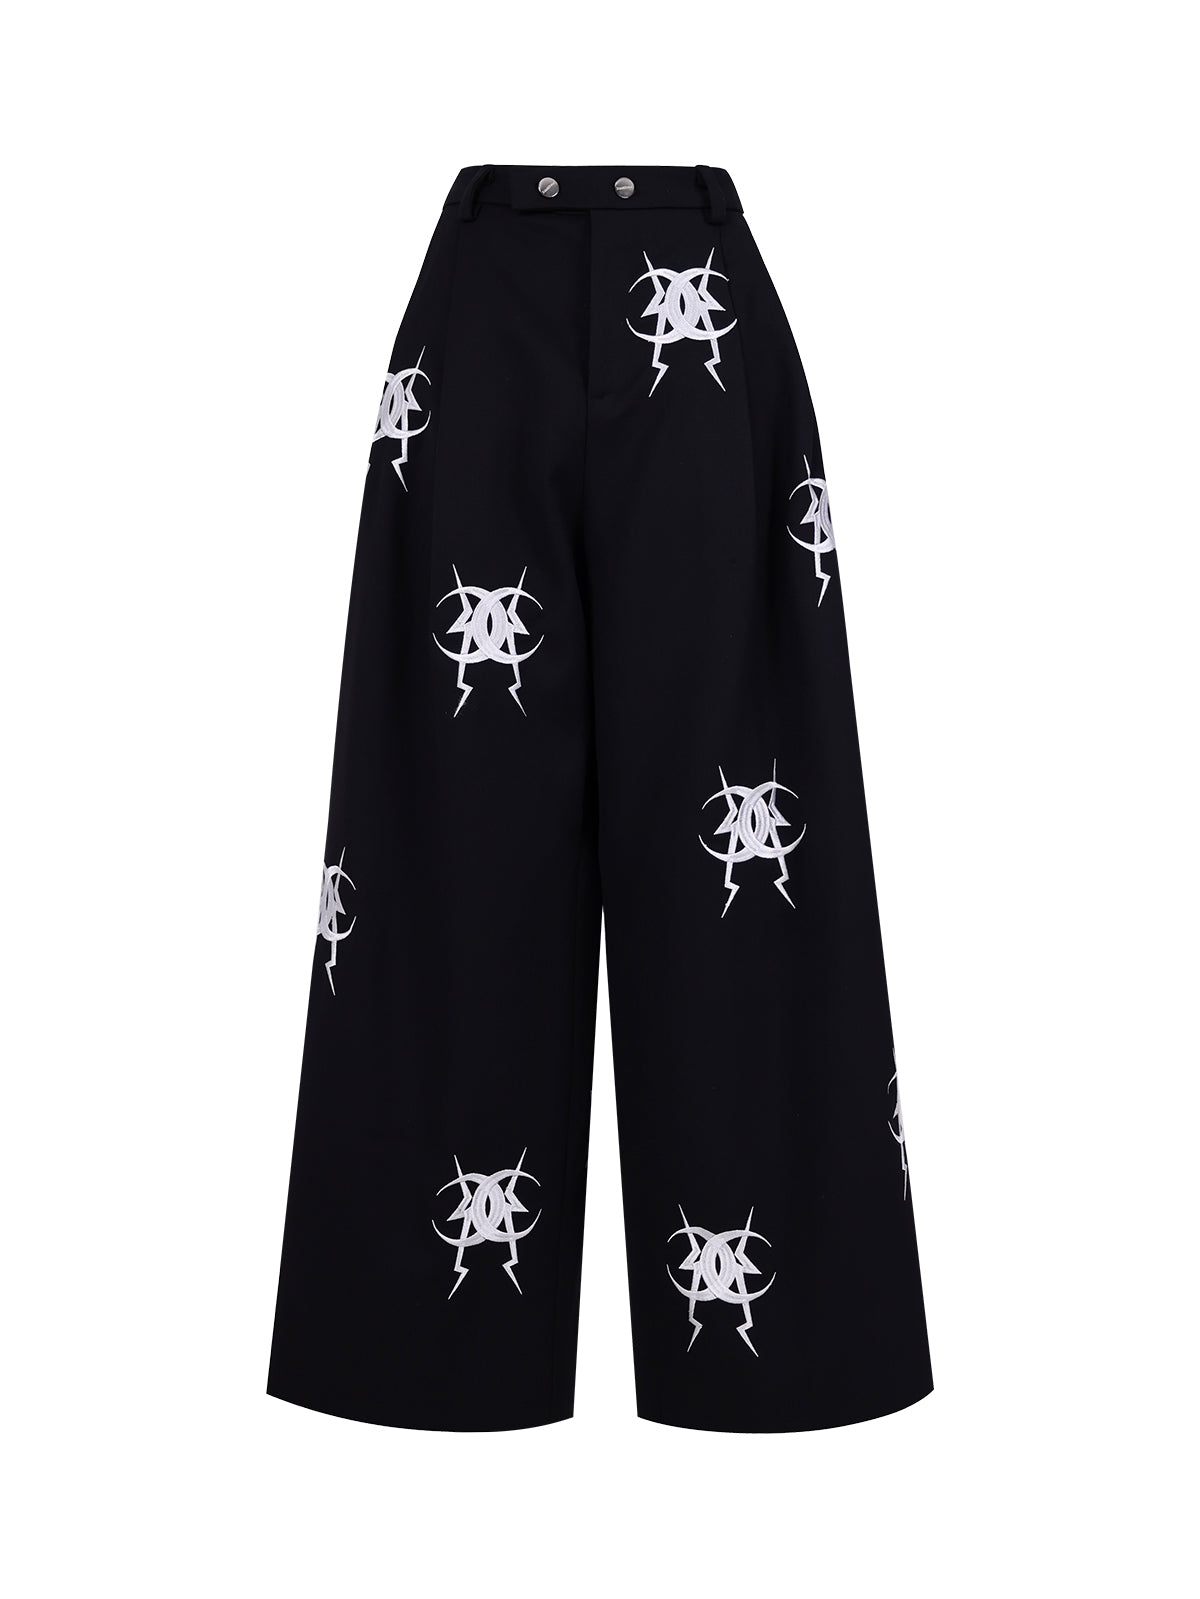 Mirror series embroidered pants